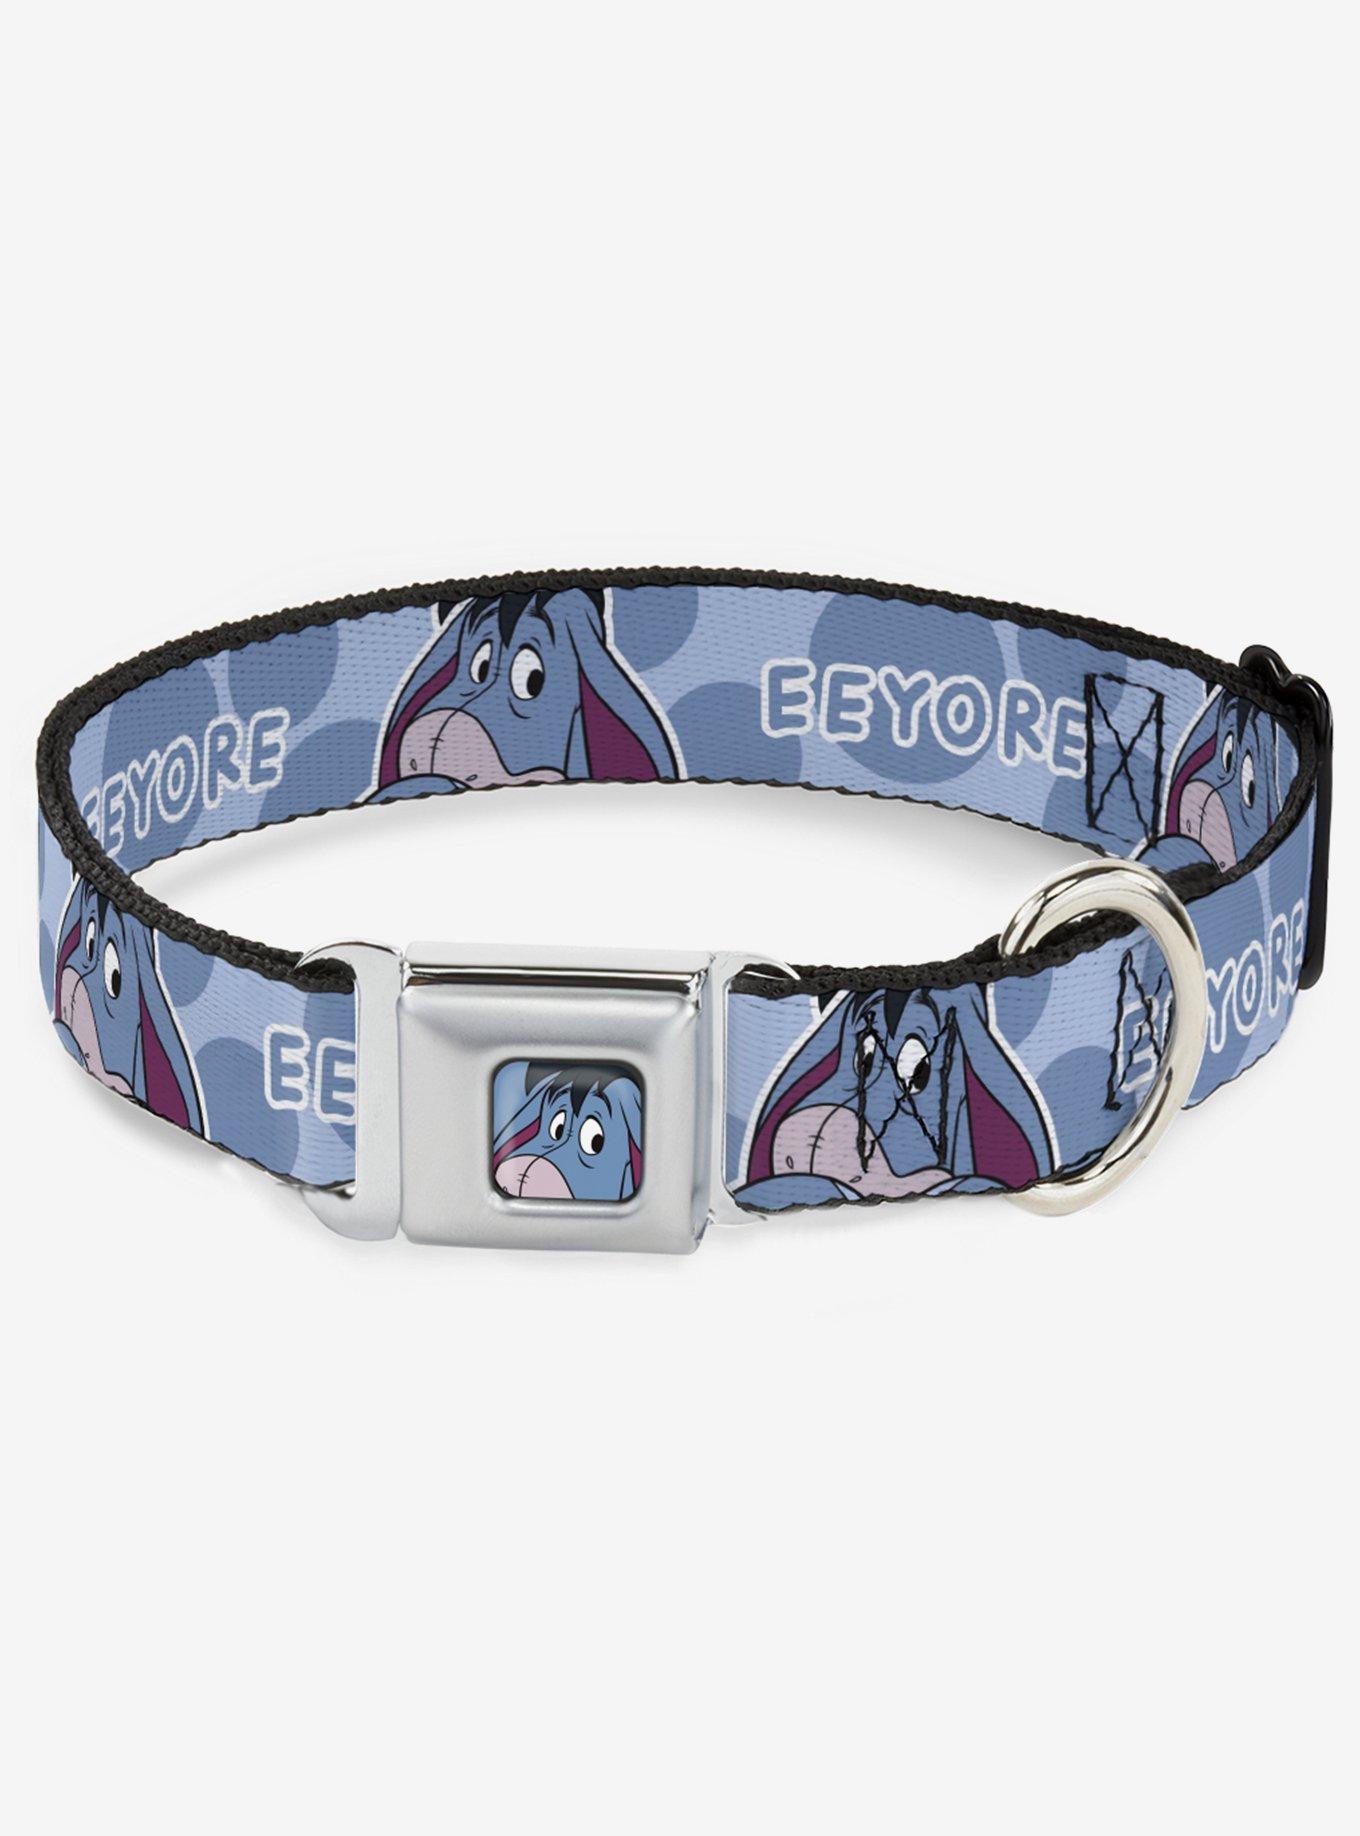 Disney Winnie The Pooh Eeyore Text And Expression Seatbelt Buckle Dog Collar, BLUE, hi-res